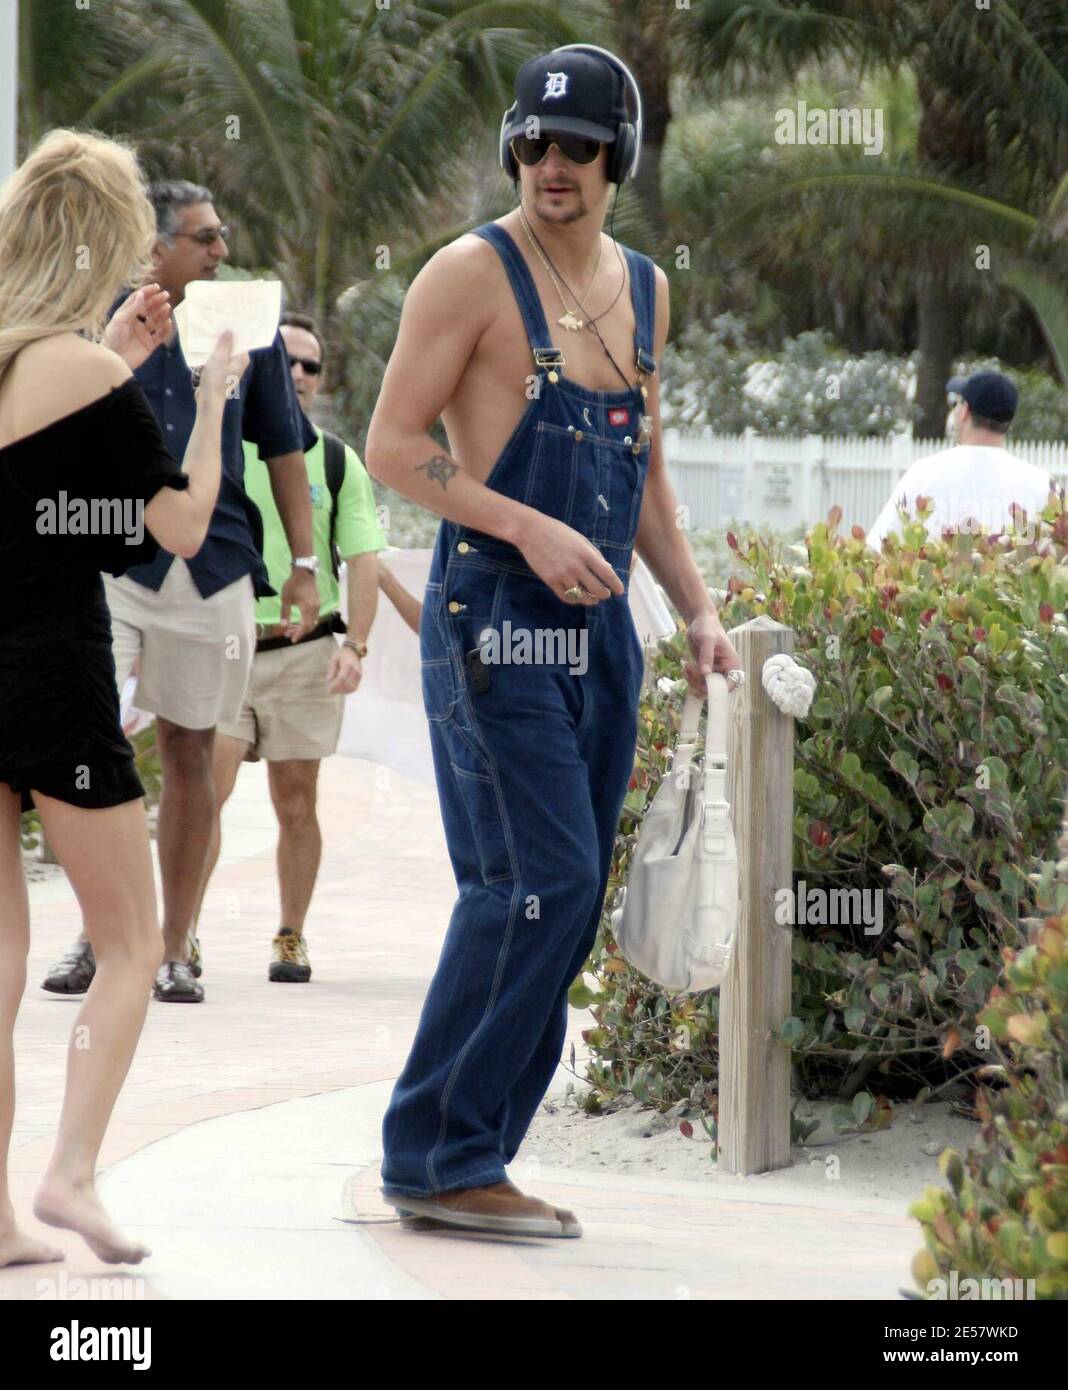 Kid Rock takes a stroll with Rande Gerber before borrowing an un-identified girl's handbag during Superbowl Weekend. Miami, FL 2/3/07.   [[rac ral]] Stock Photo